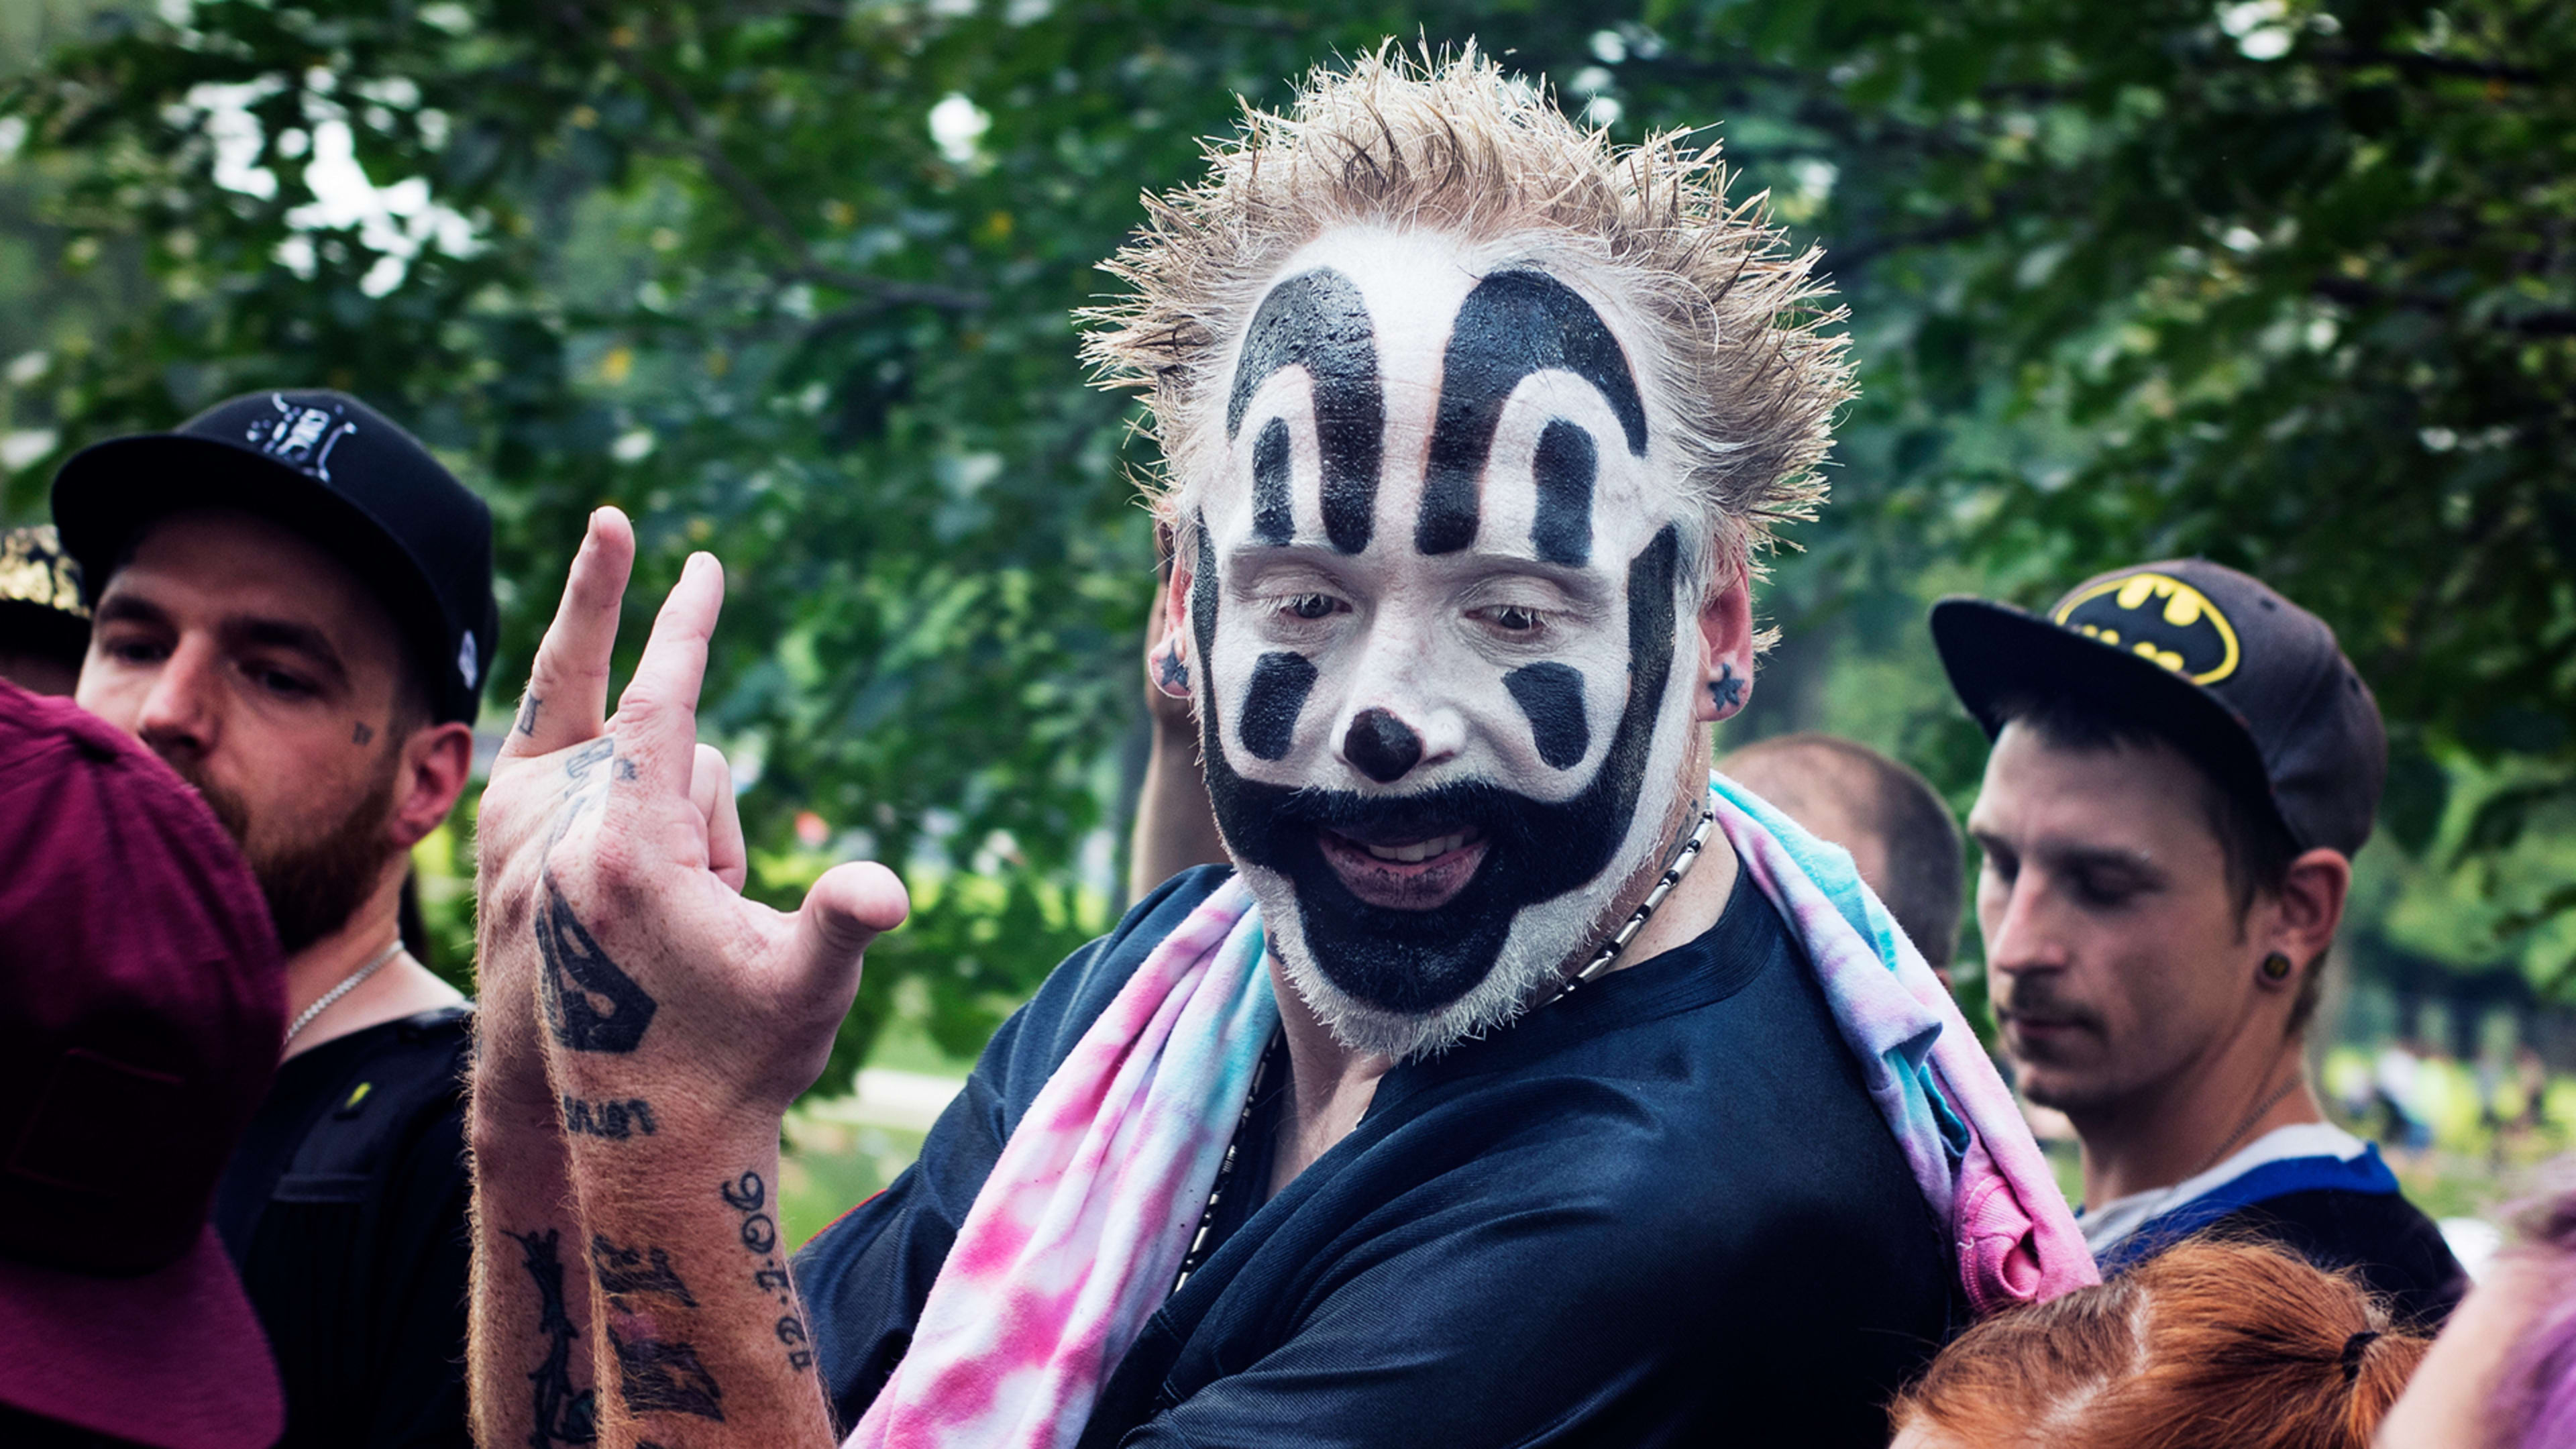 To thwart face recognition, maybe just wear Juggalo makeup